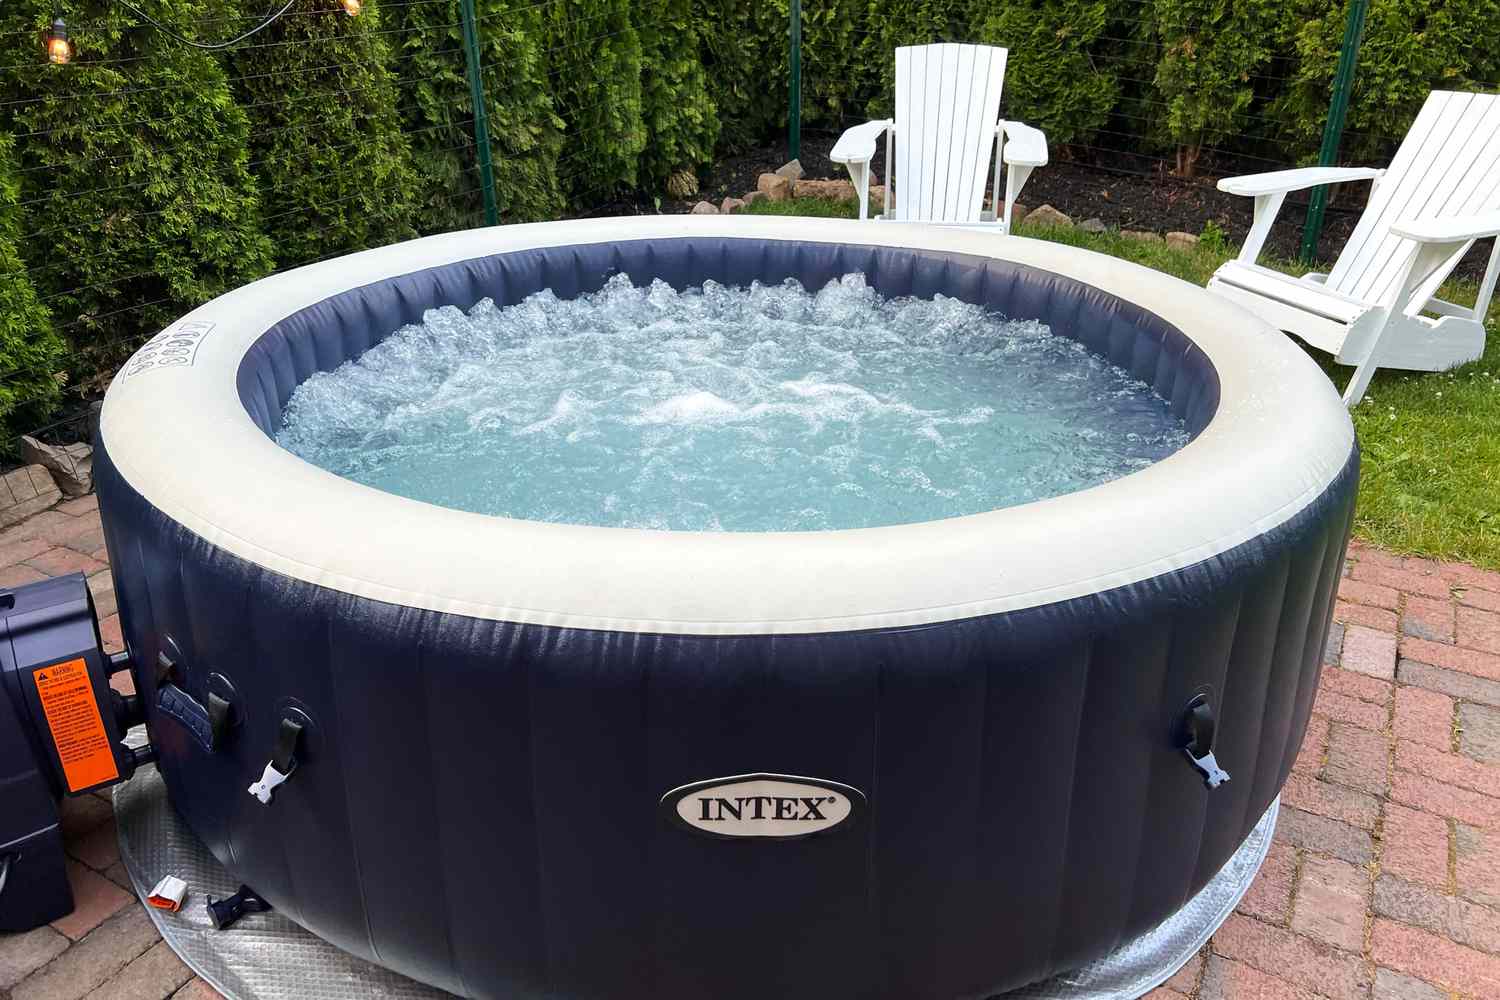 How Loud Is A Hot Tub